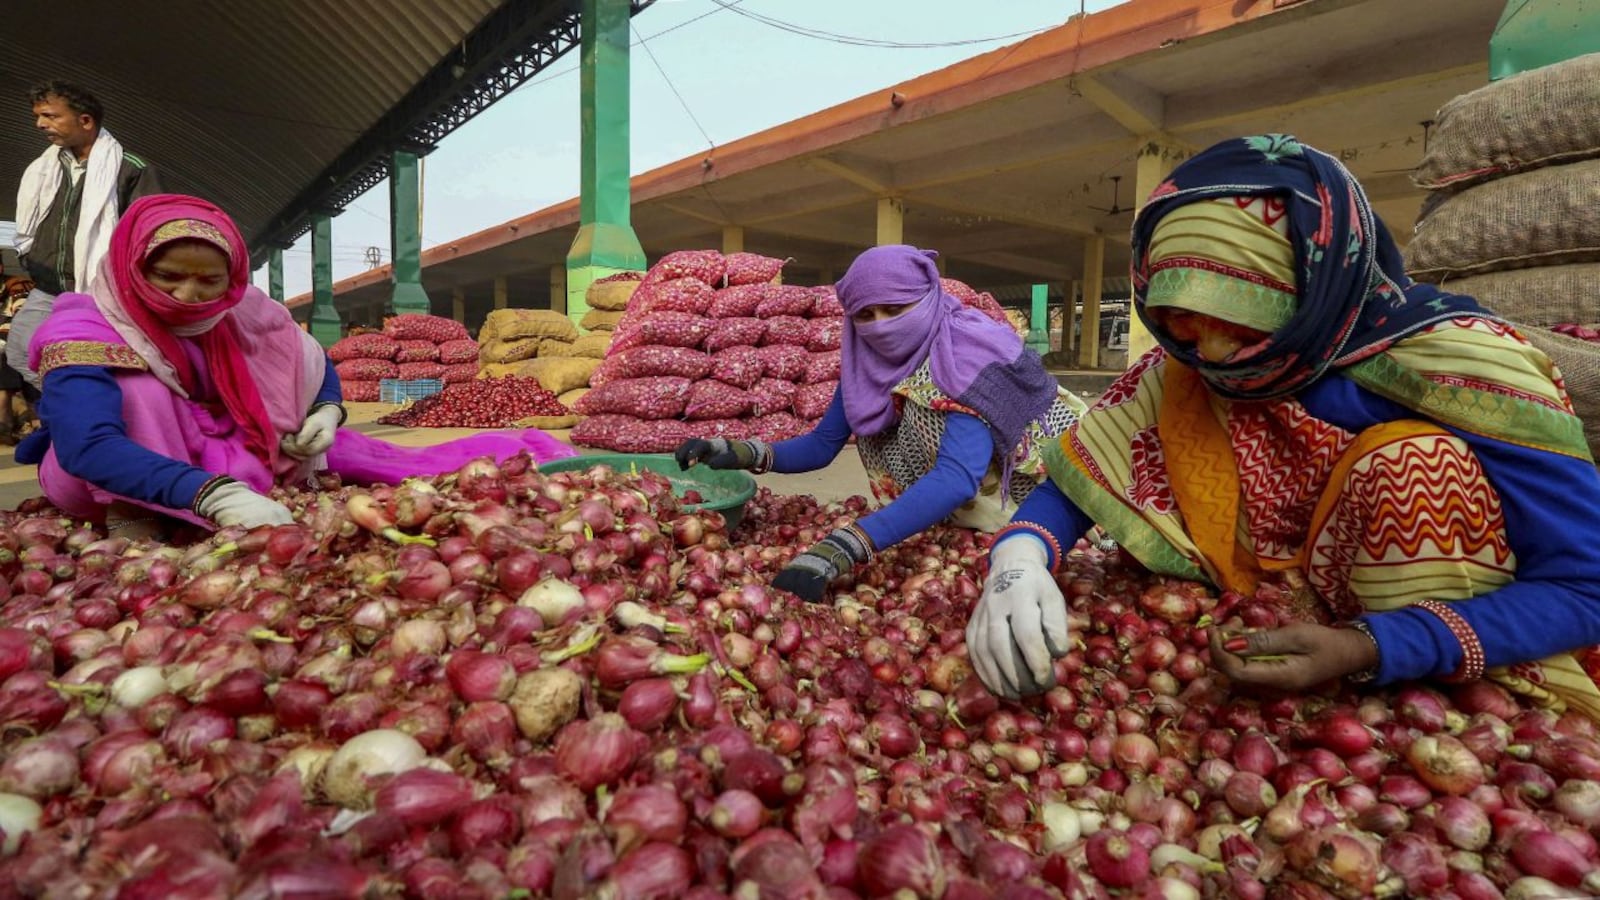 Onions at Rs 100/kg in Mumbai, Pune as wholesale prices soar: Report